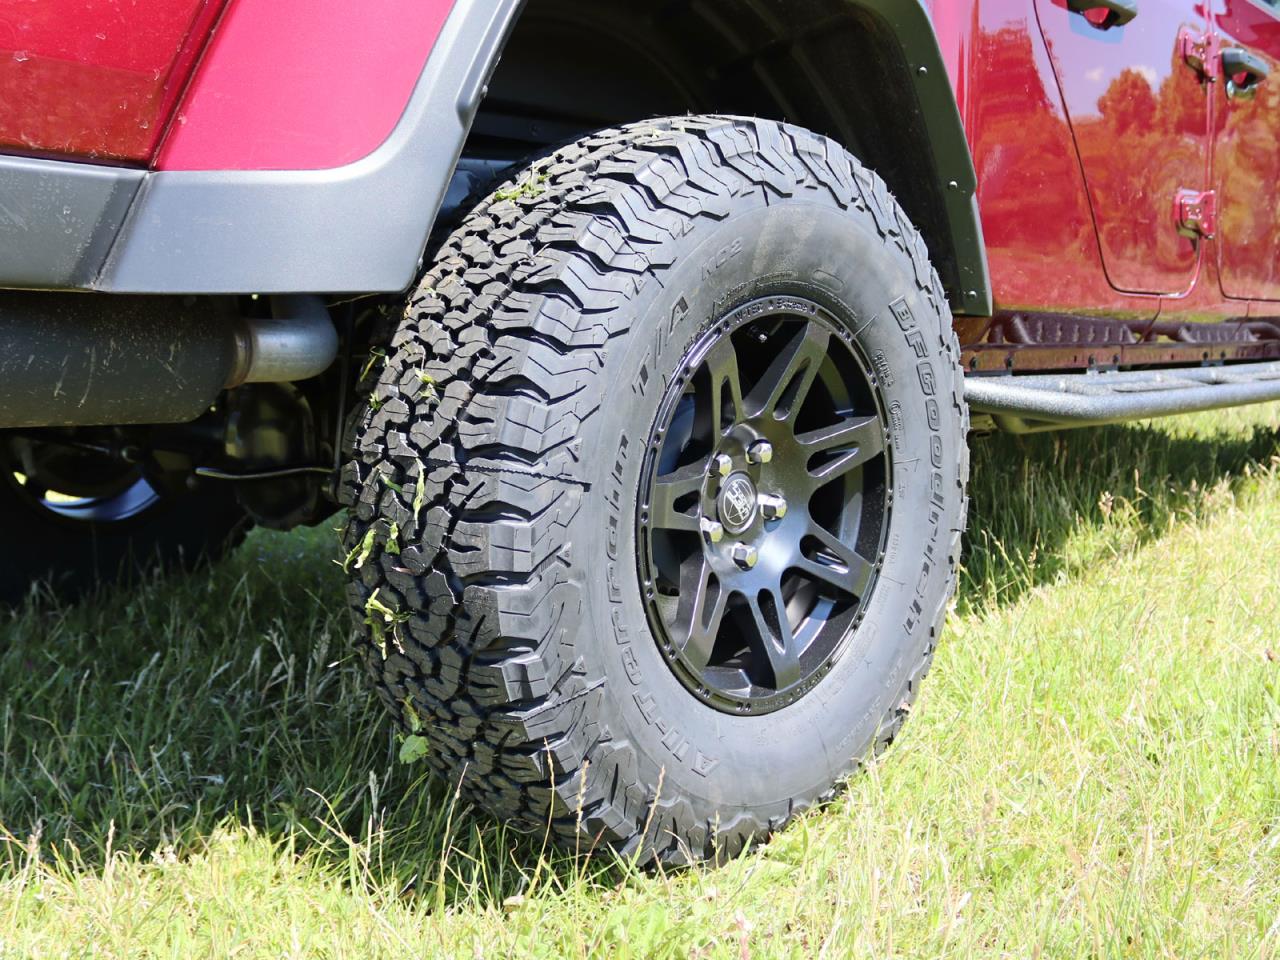 Complete wheels W-TEC Extreme 8,5x17 (black) with 285/70 R17 (118-R) BF Goodrich All Terrain suitable for Jeep Gladiator JT (2019-)